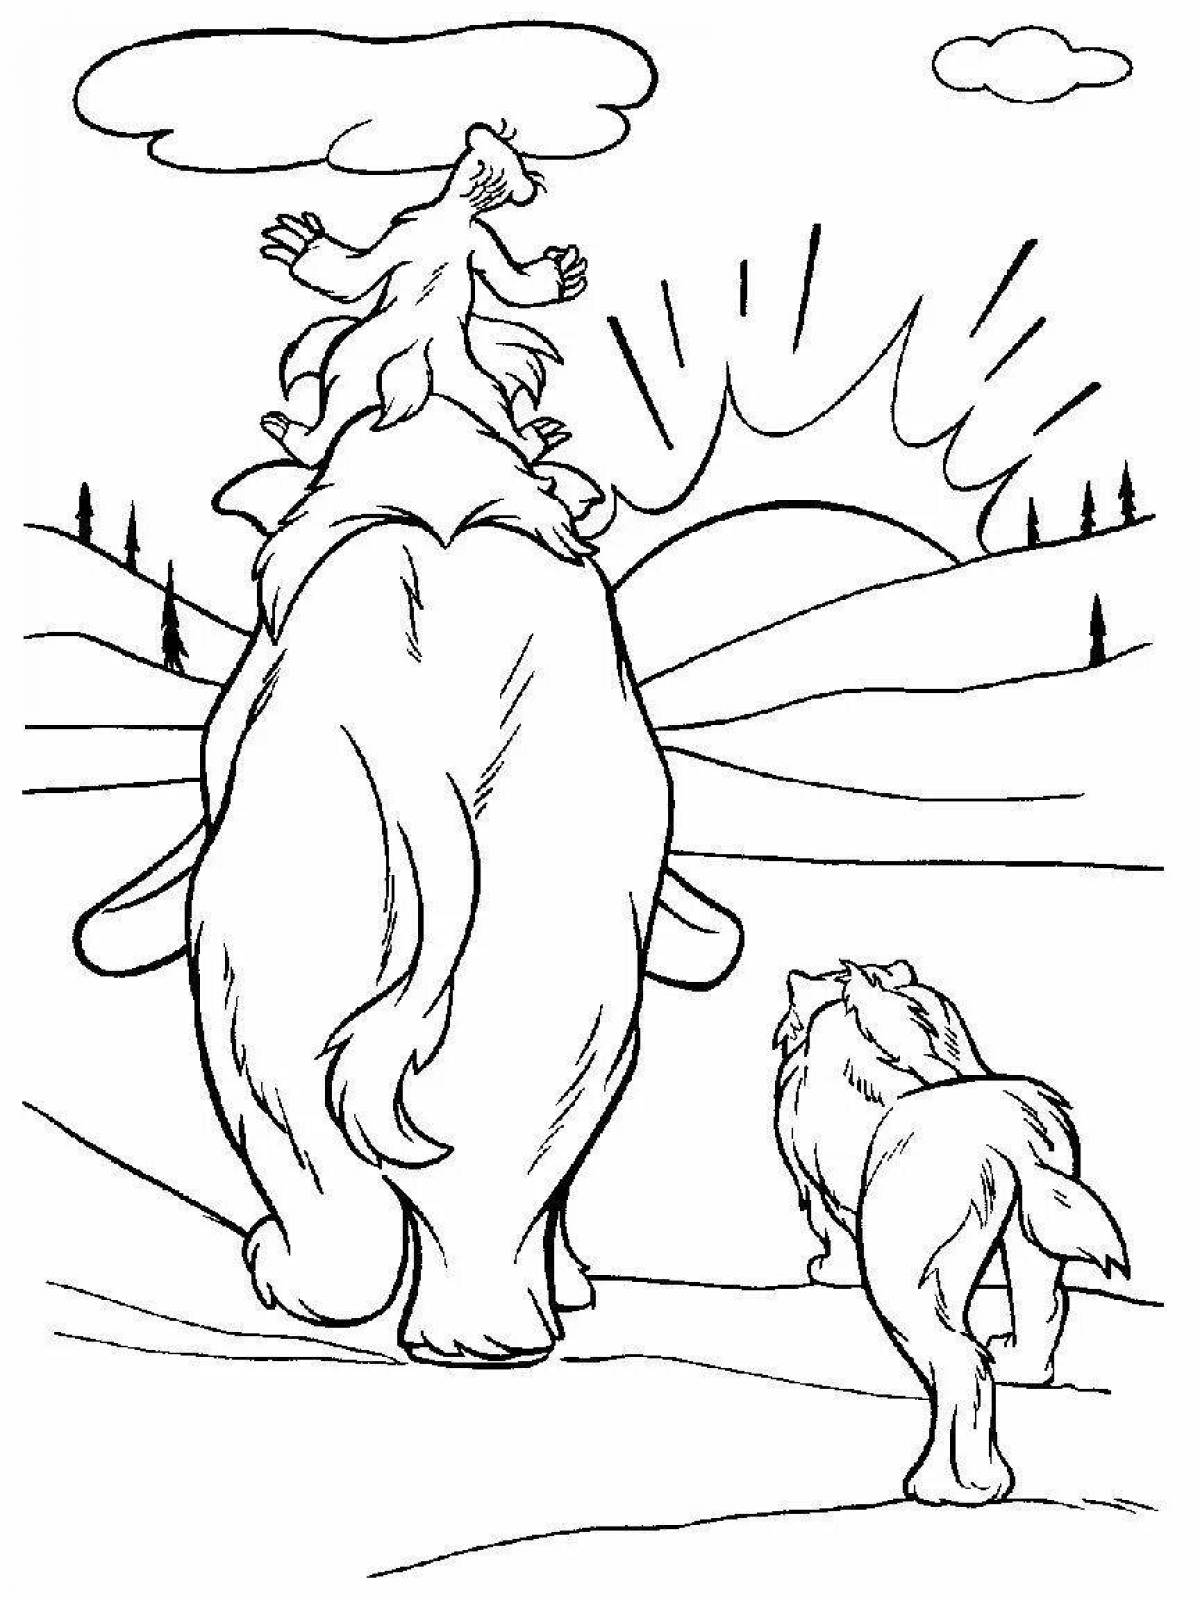 Amazing shira ice age coloring page